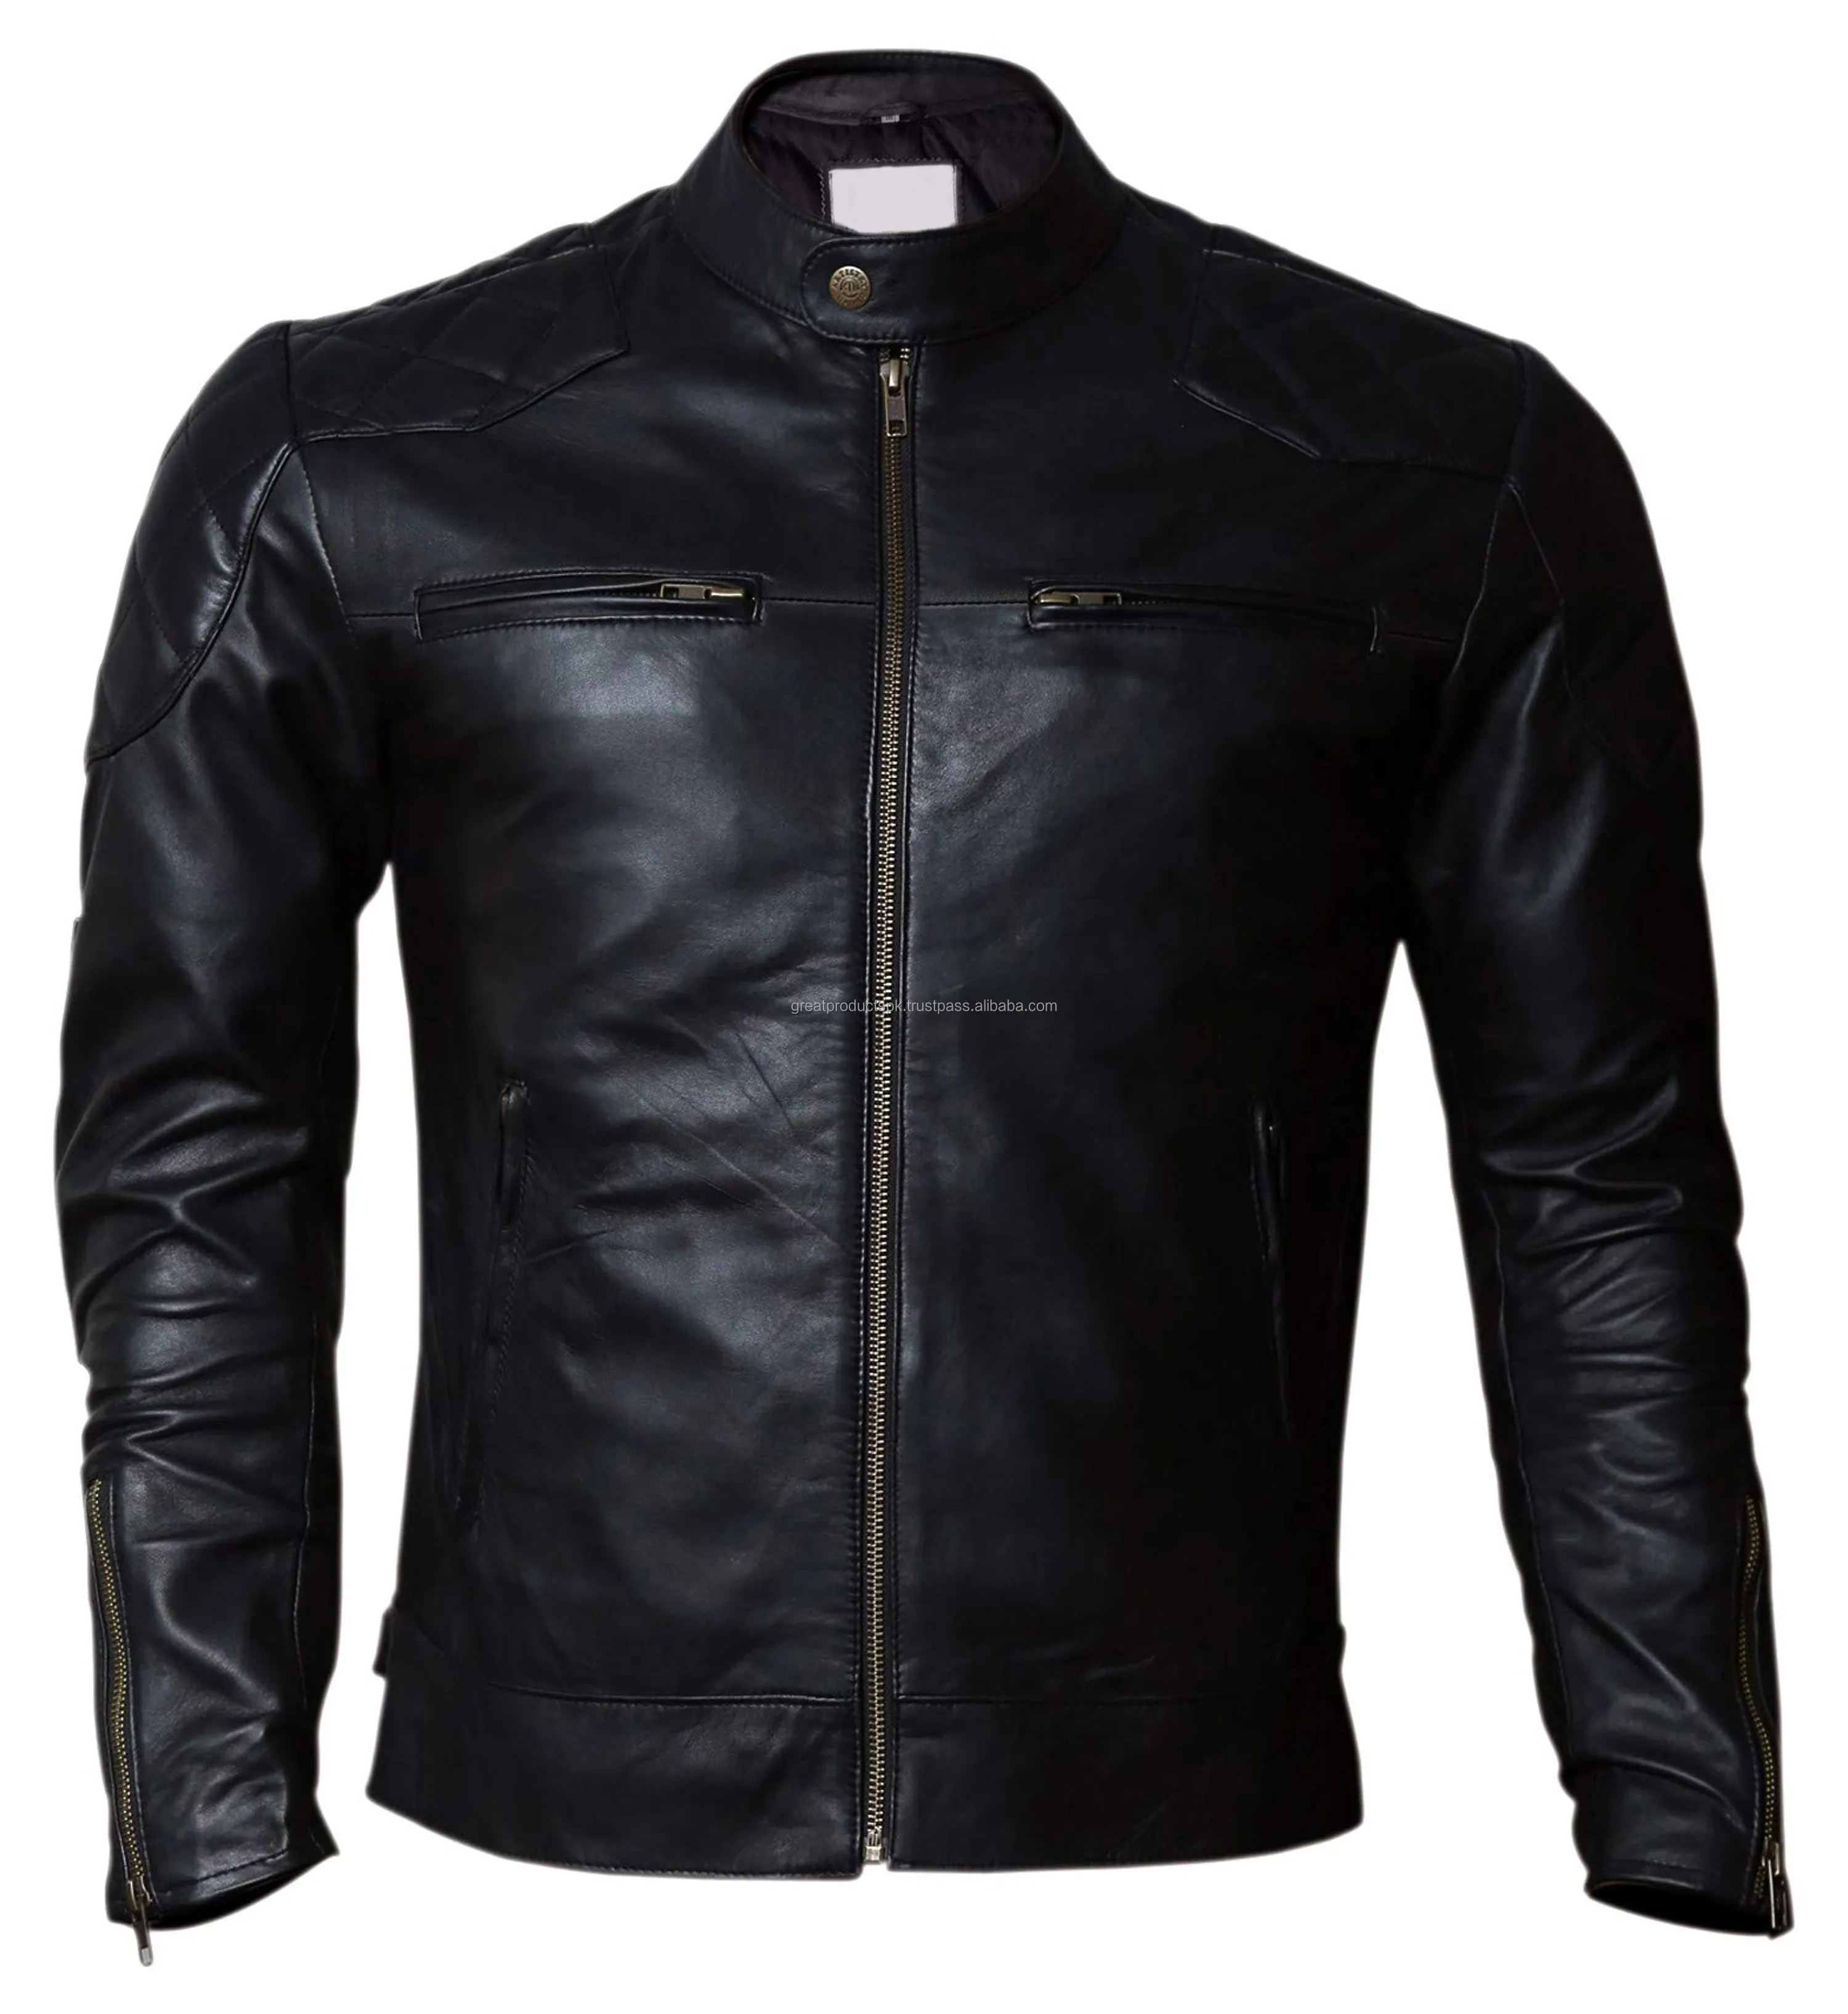 Men's leather jacket PU leather motorcycle youth business double-breasted suit collar long sleeve mid-length leather jacket